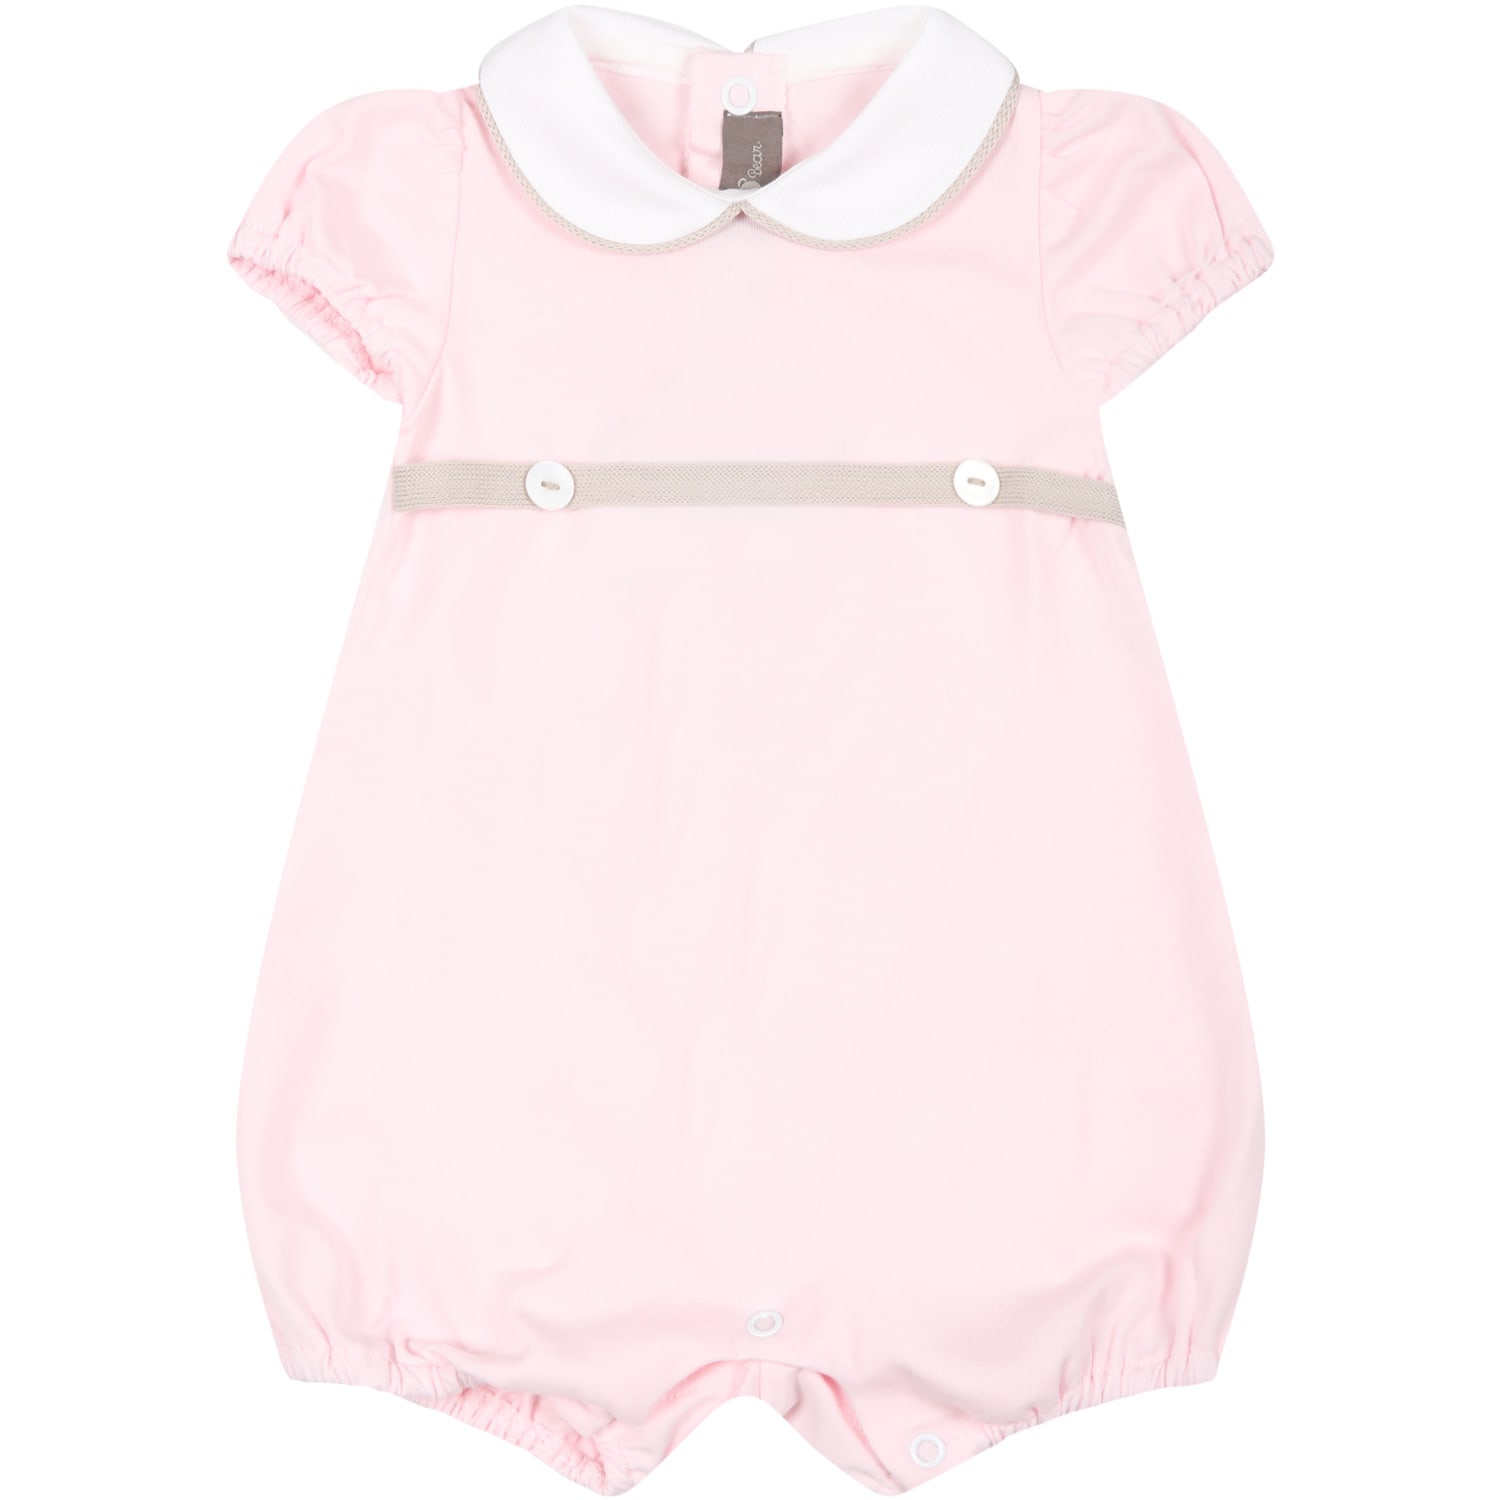 Little Bear Pink Romper For Baby Girl With Belt